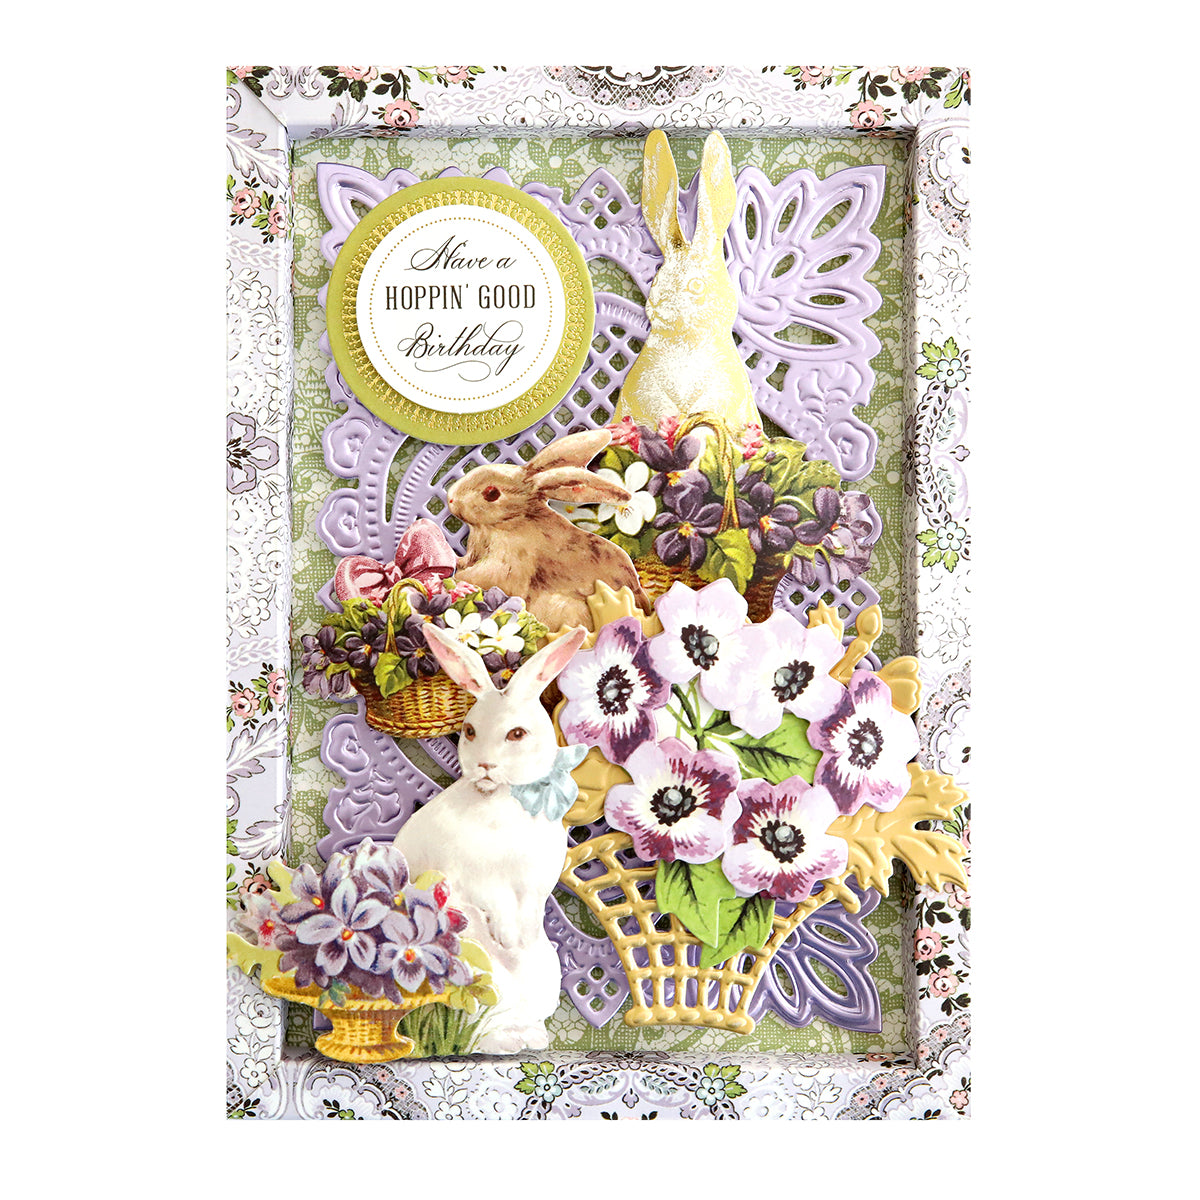 A card with Bunny Stickers and Sentiments, flowers, and Easter Bunny stickers.